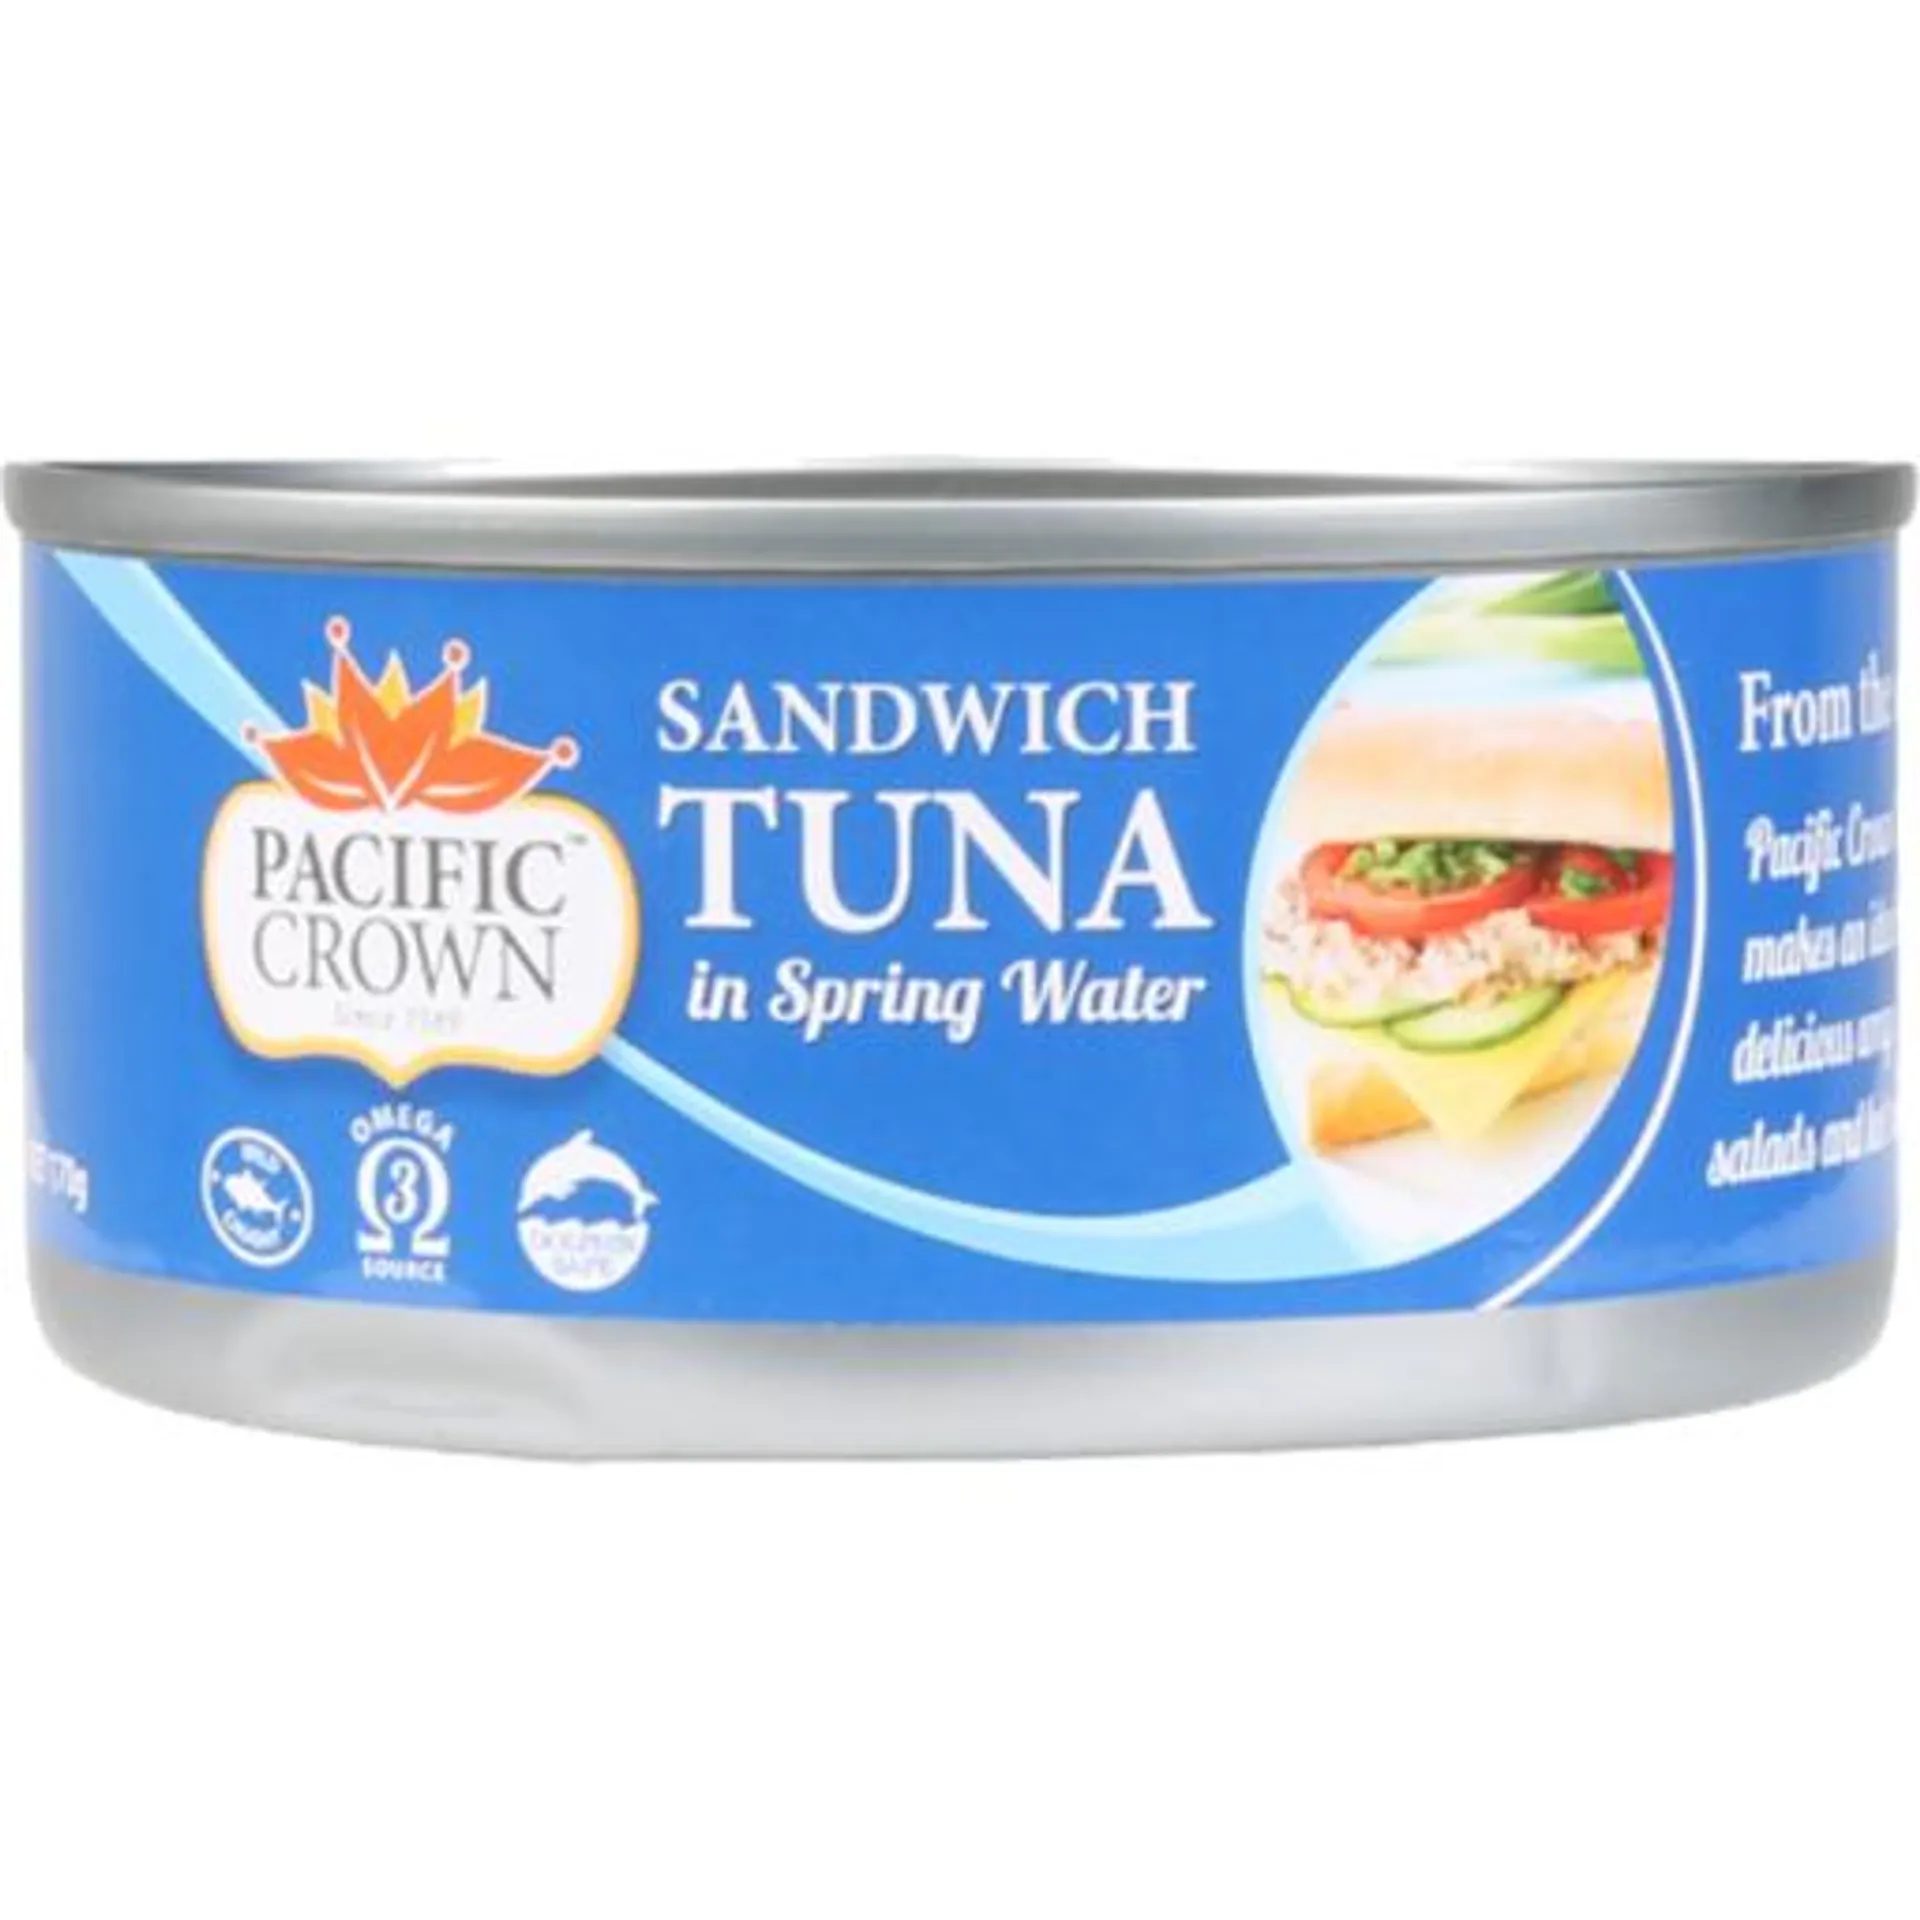 Pacific Crown Tuna Spring Water 170g